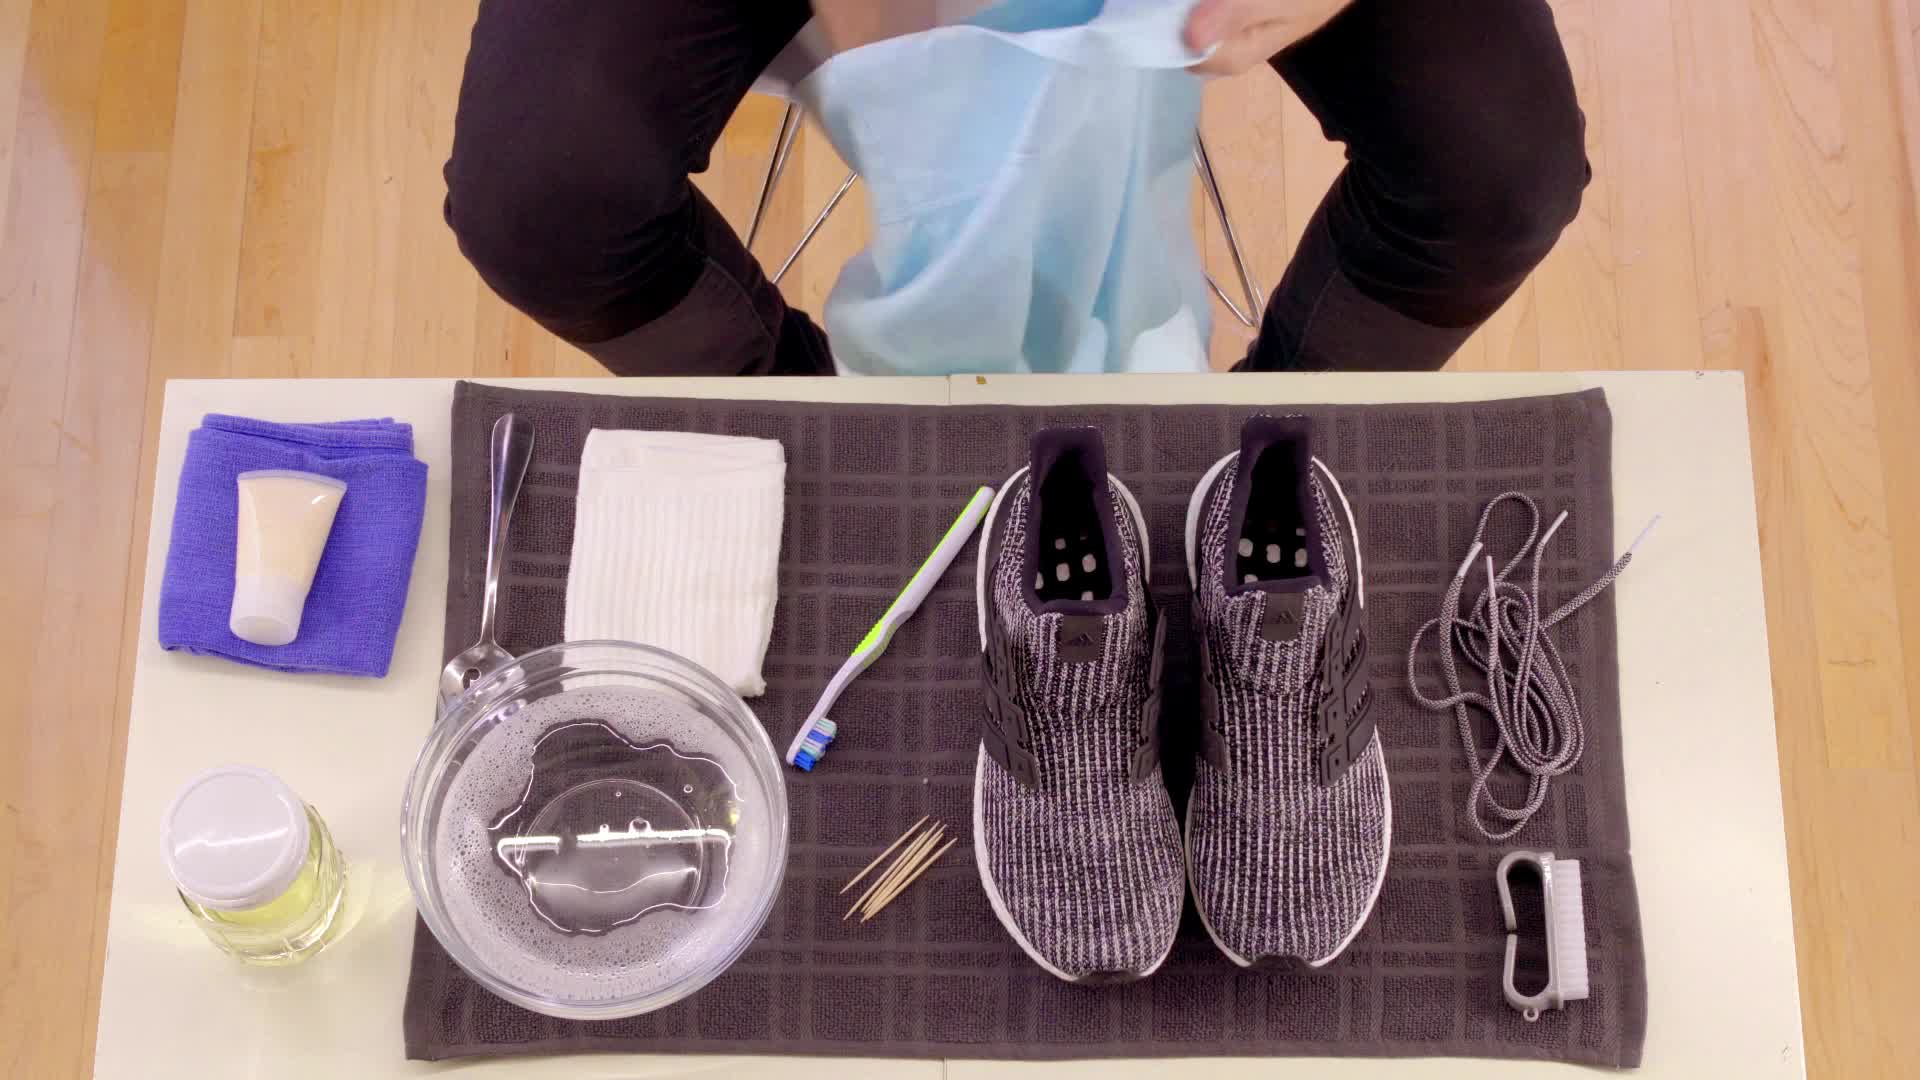 how to clean white adidas running shoes